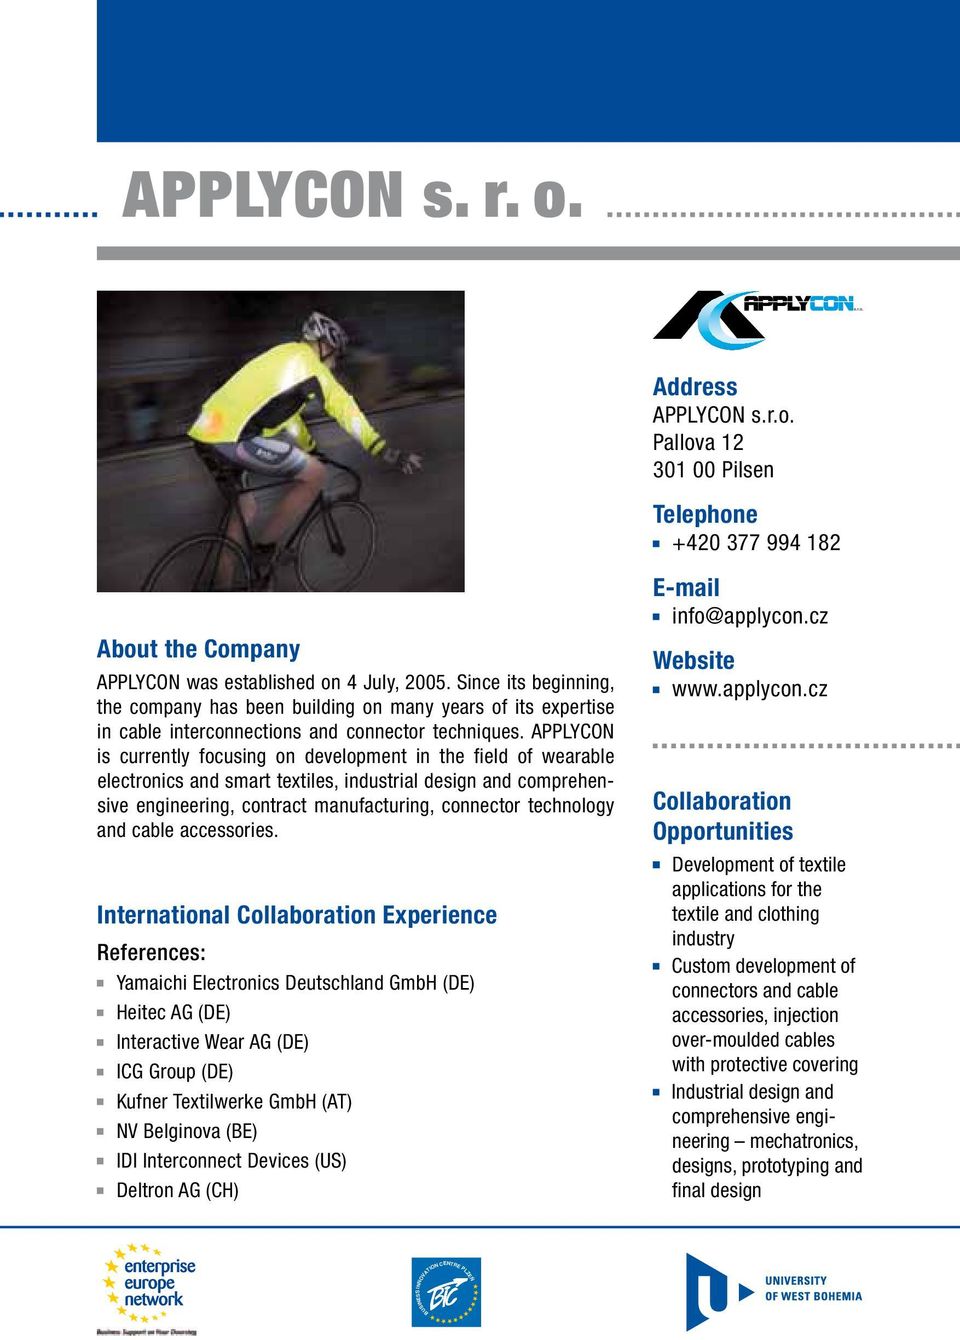 APPLYCON is currently focusing on development in the field of wearable electronics and smart textiles, industrial design and comprehensive engineering, contract manufacturing, connector technology